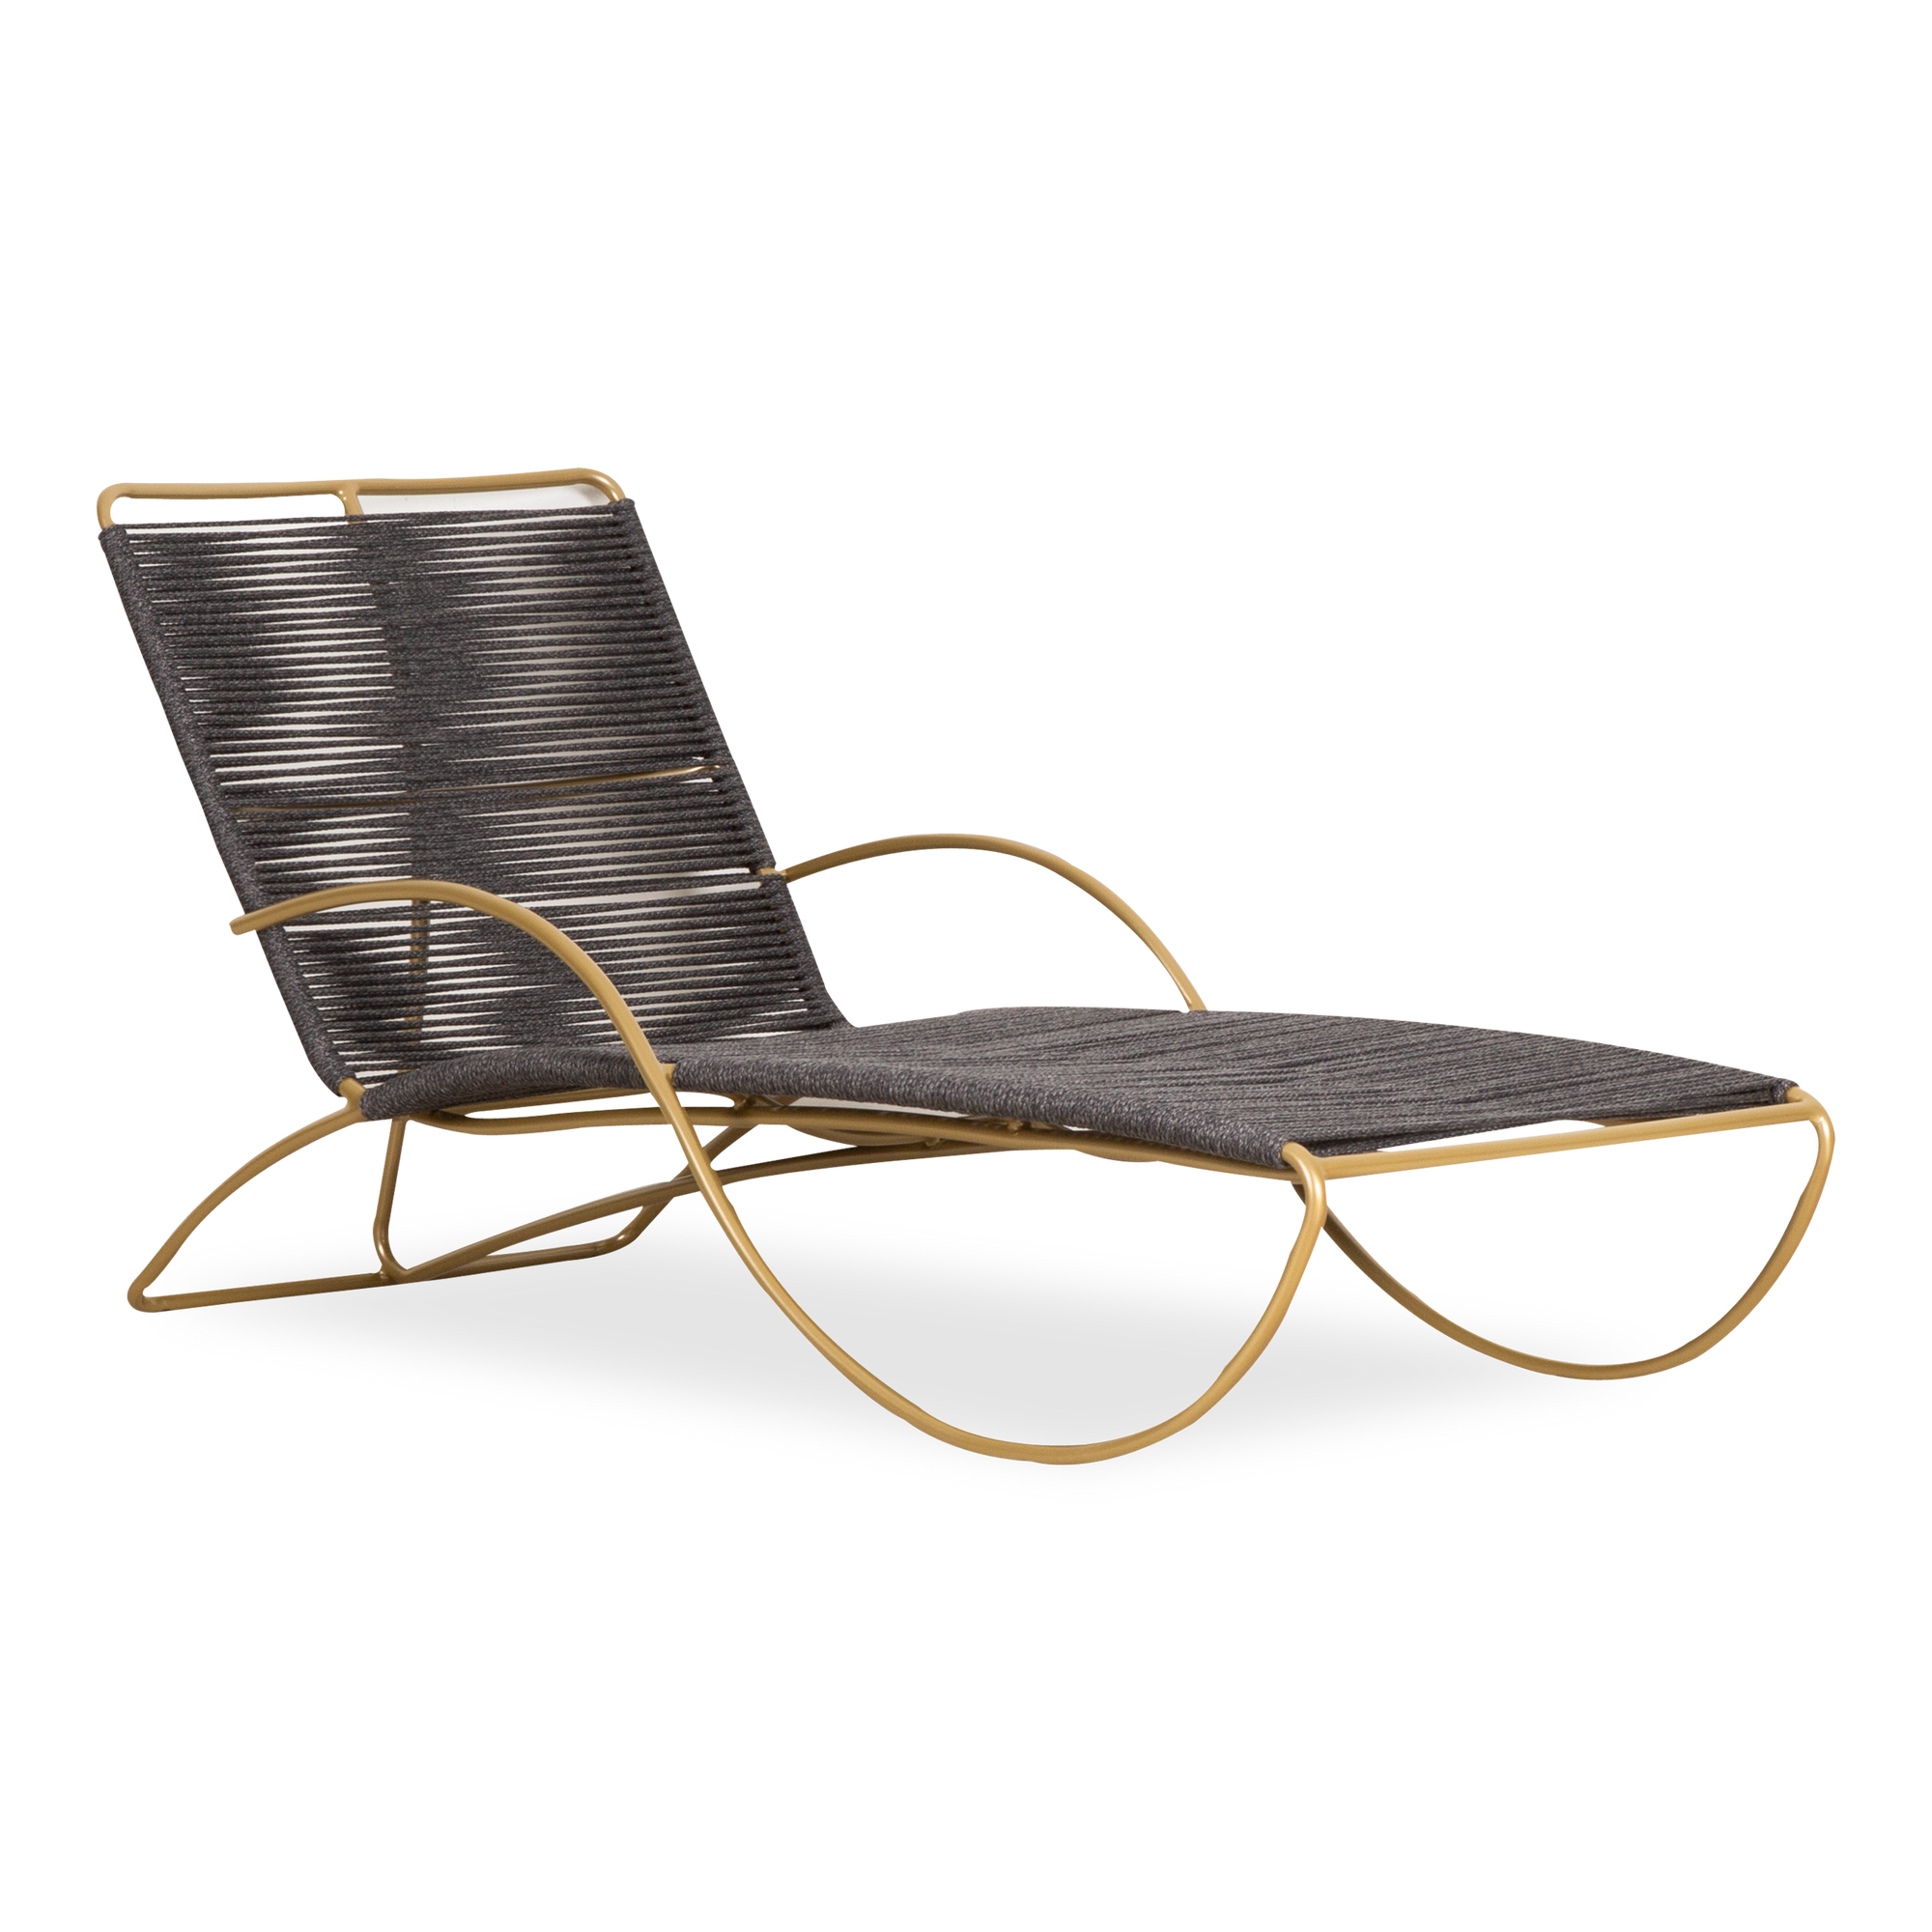 A free flowing frame design and statement rope details define the Walter Lamb Aluminum Contoured Chaise.